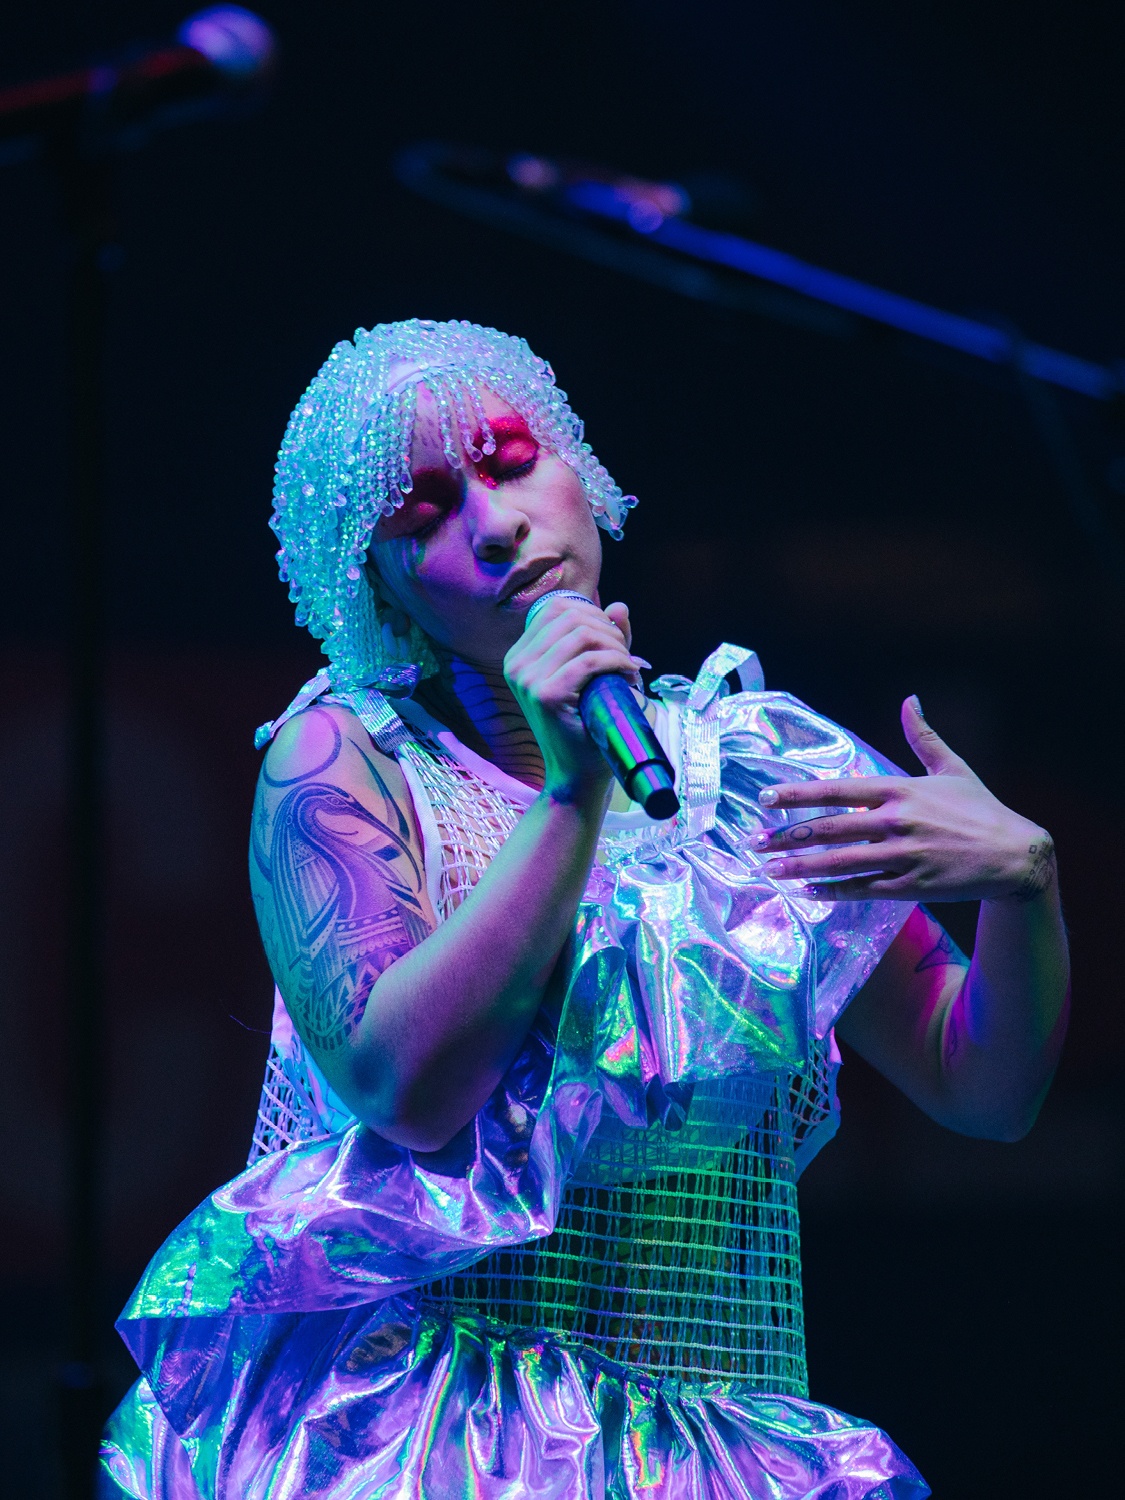 A performer sings into a microphone bathed in a bluish light. She wears a shimmering, beaded cap on her head and a shimmering ruffled costume.